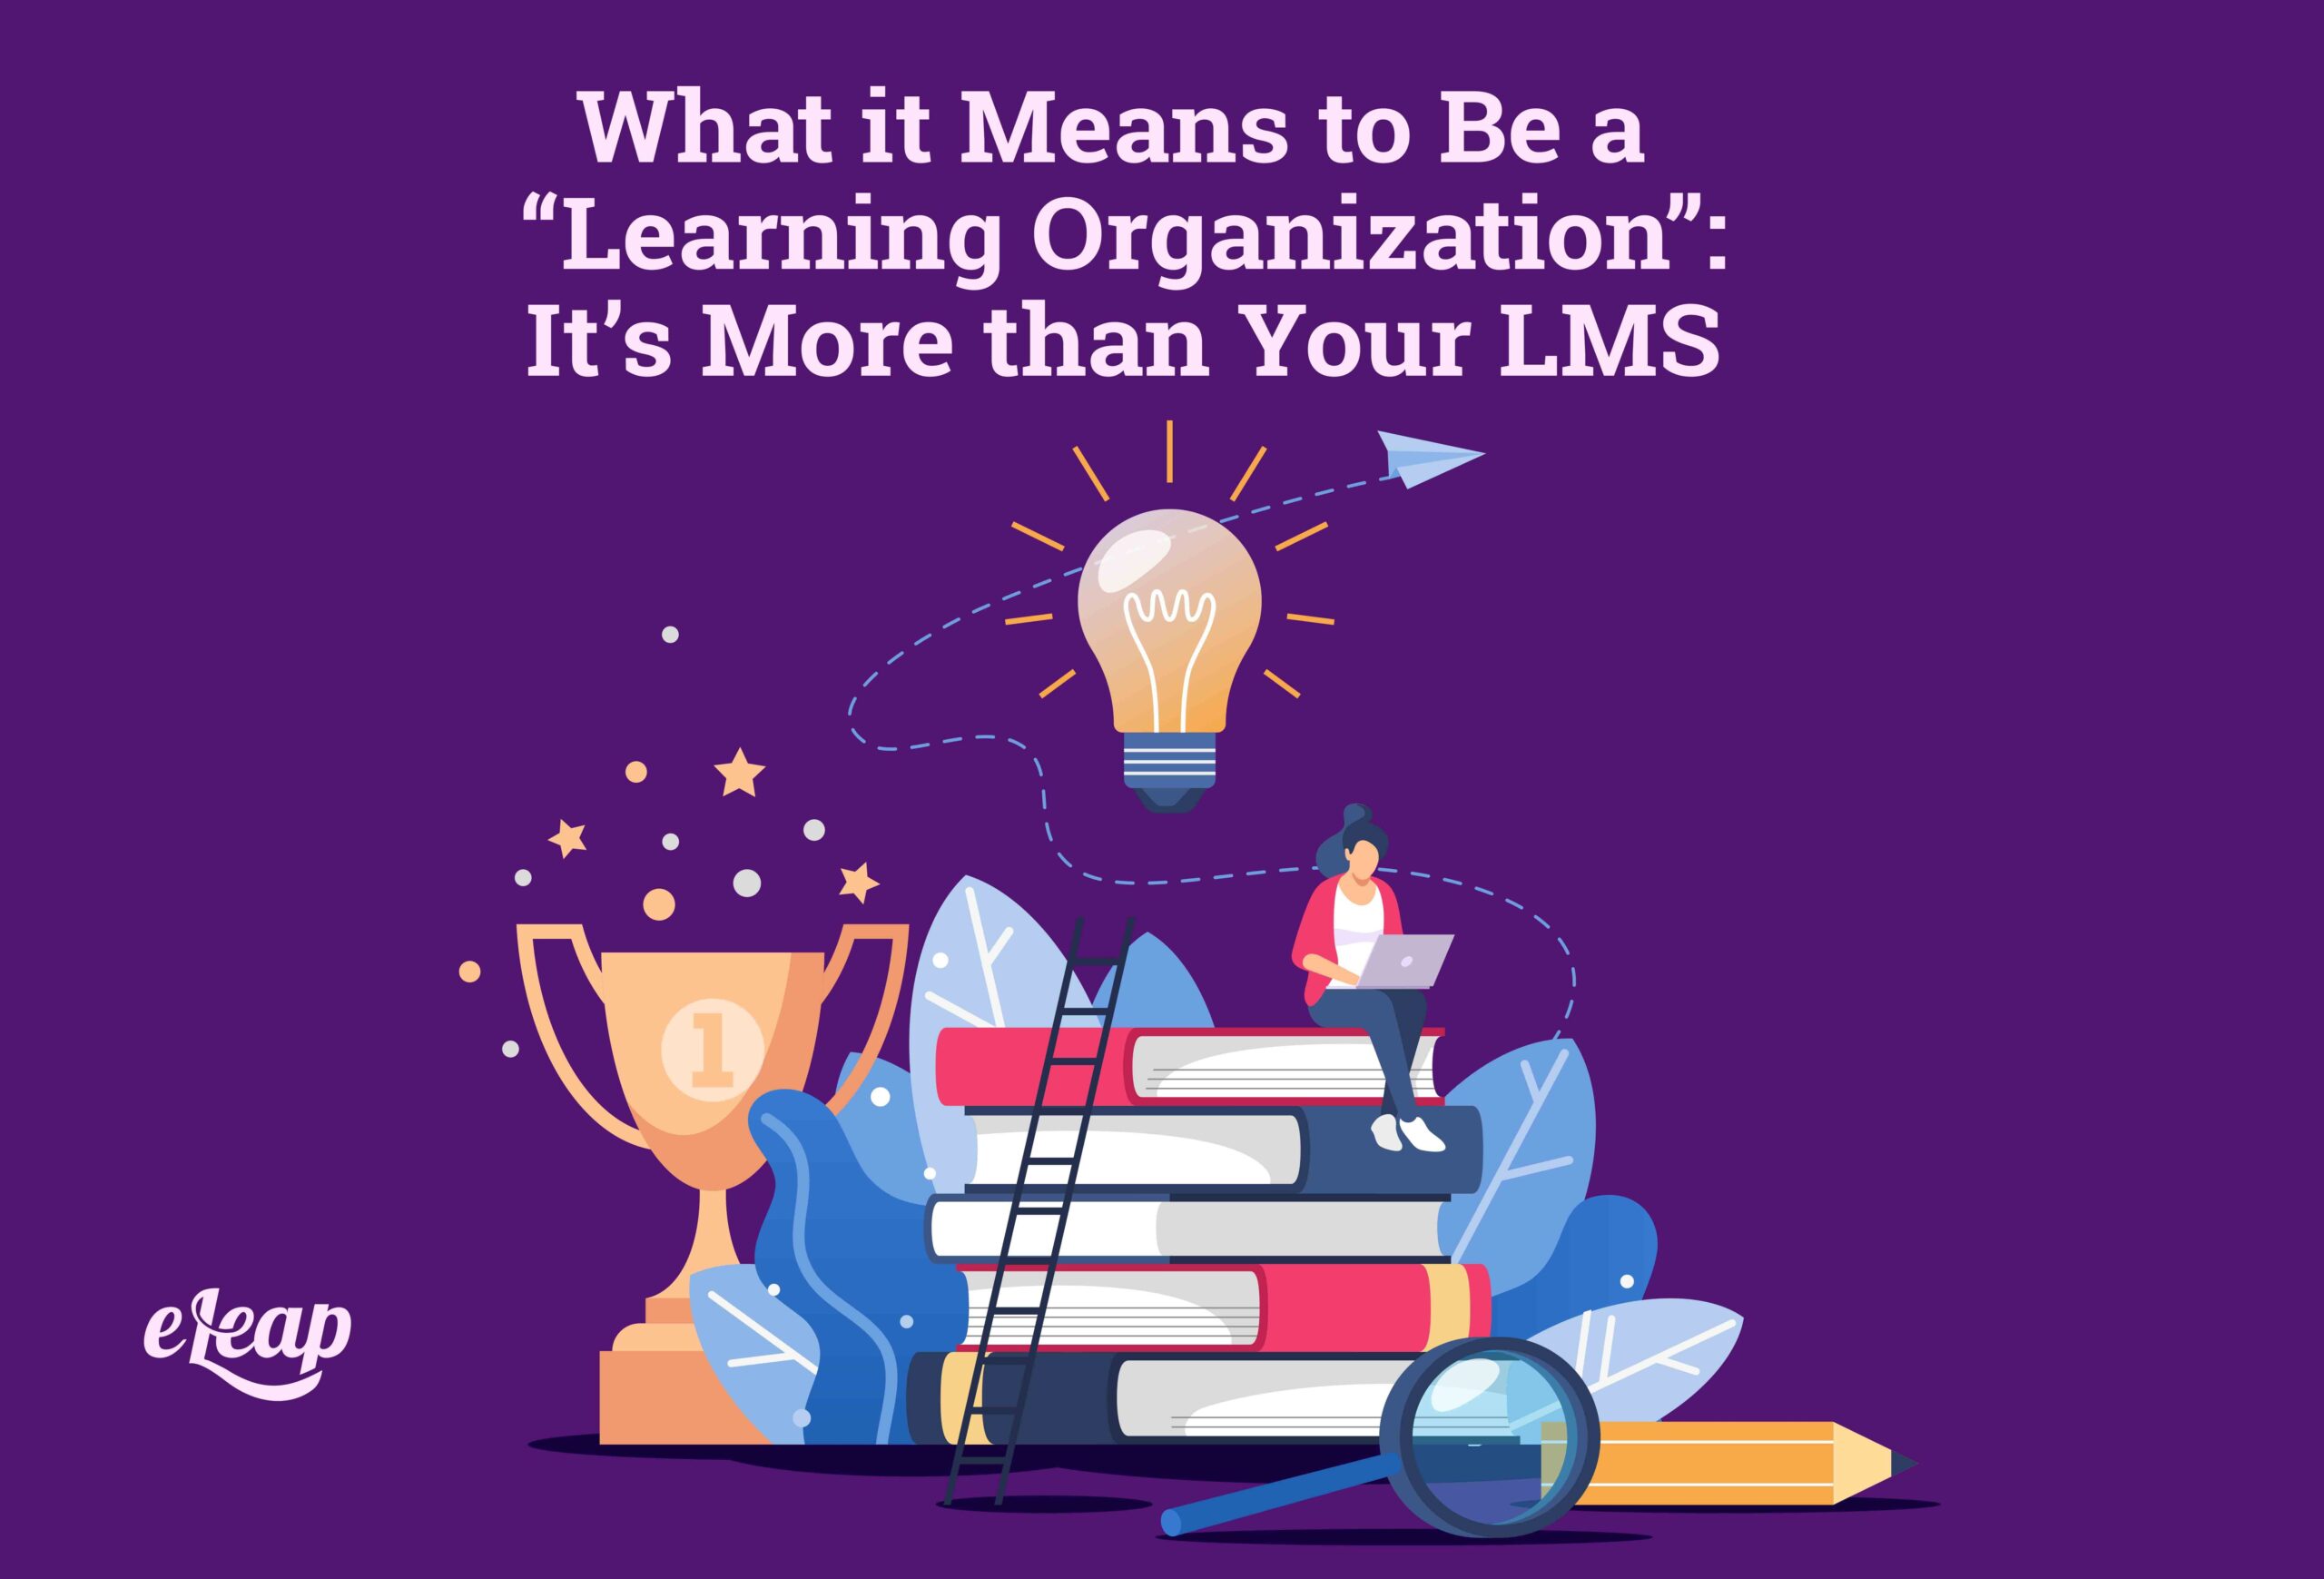 What it Means to Be a “Learning Organization”: It’s More than Your LMS